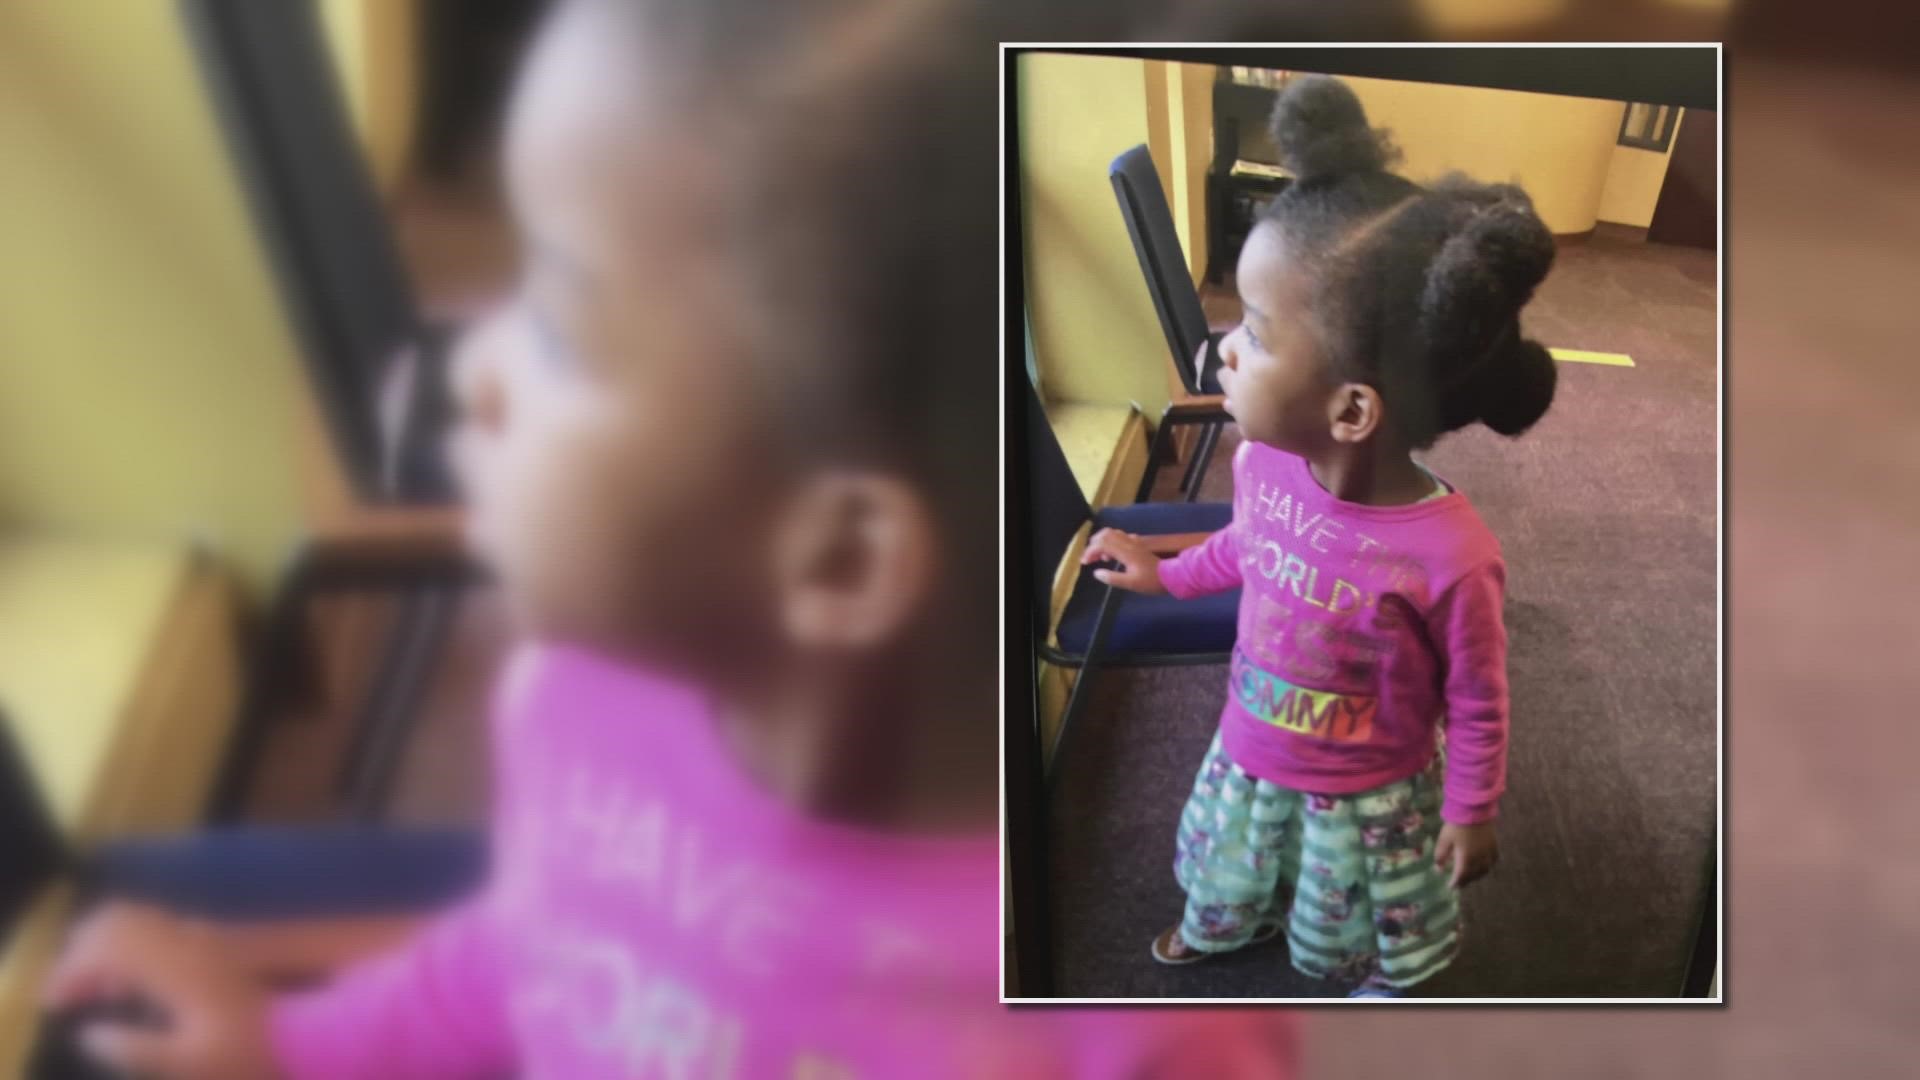 Police in Plainfield confirmed Monday that the child who was recovered from a body of water last week is 4-year-old Fiedwenya Fiefe.